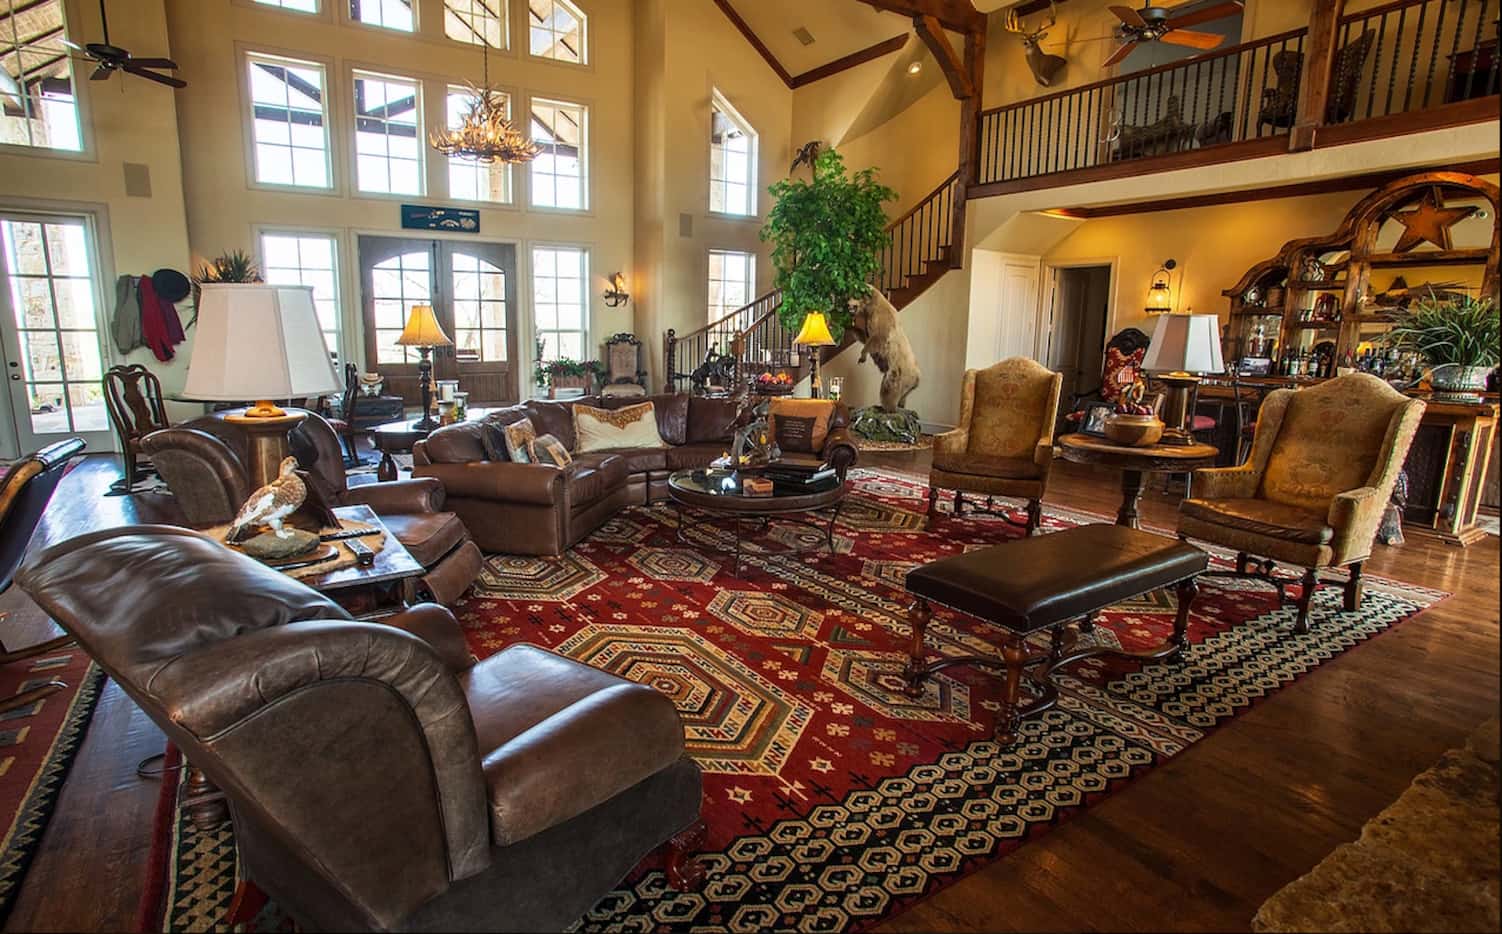 The ranch has an 8,000-square-foot main house.